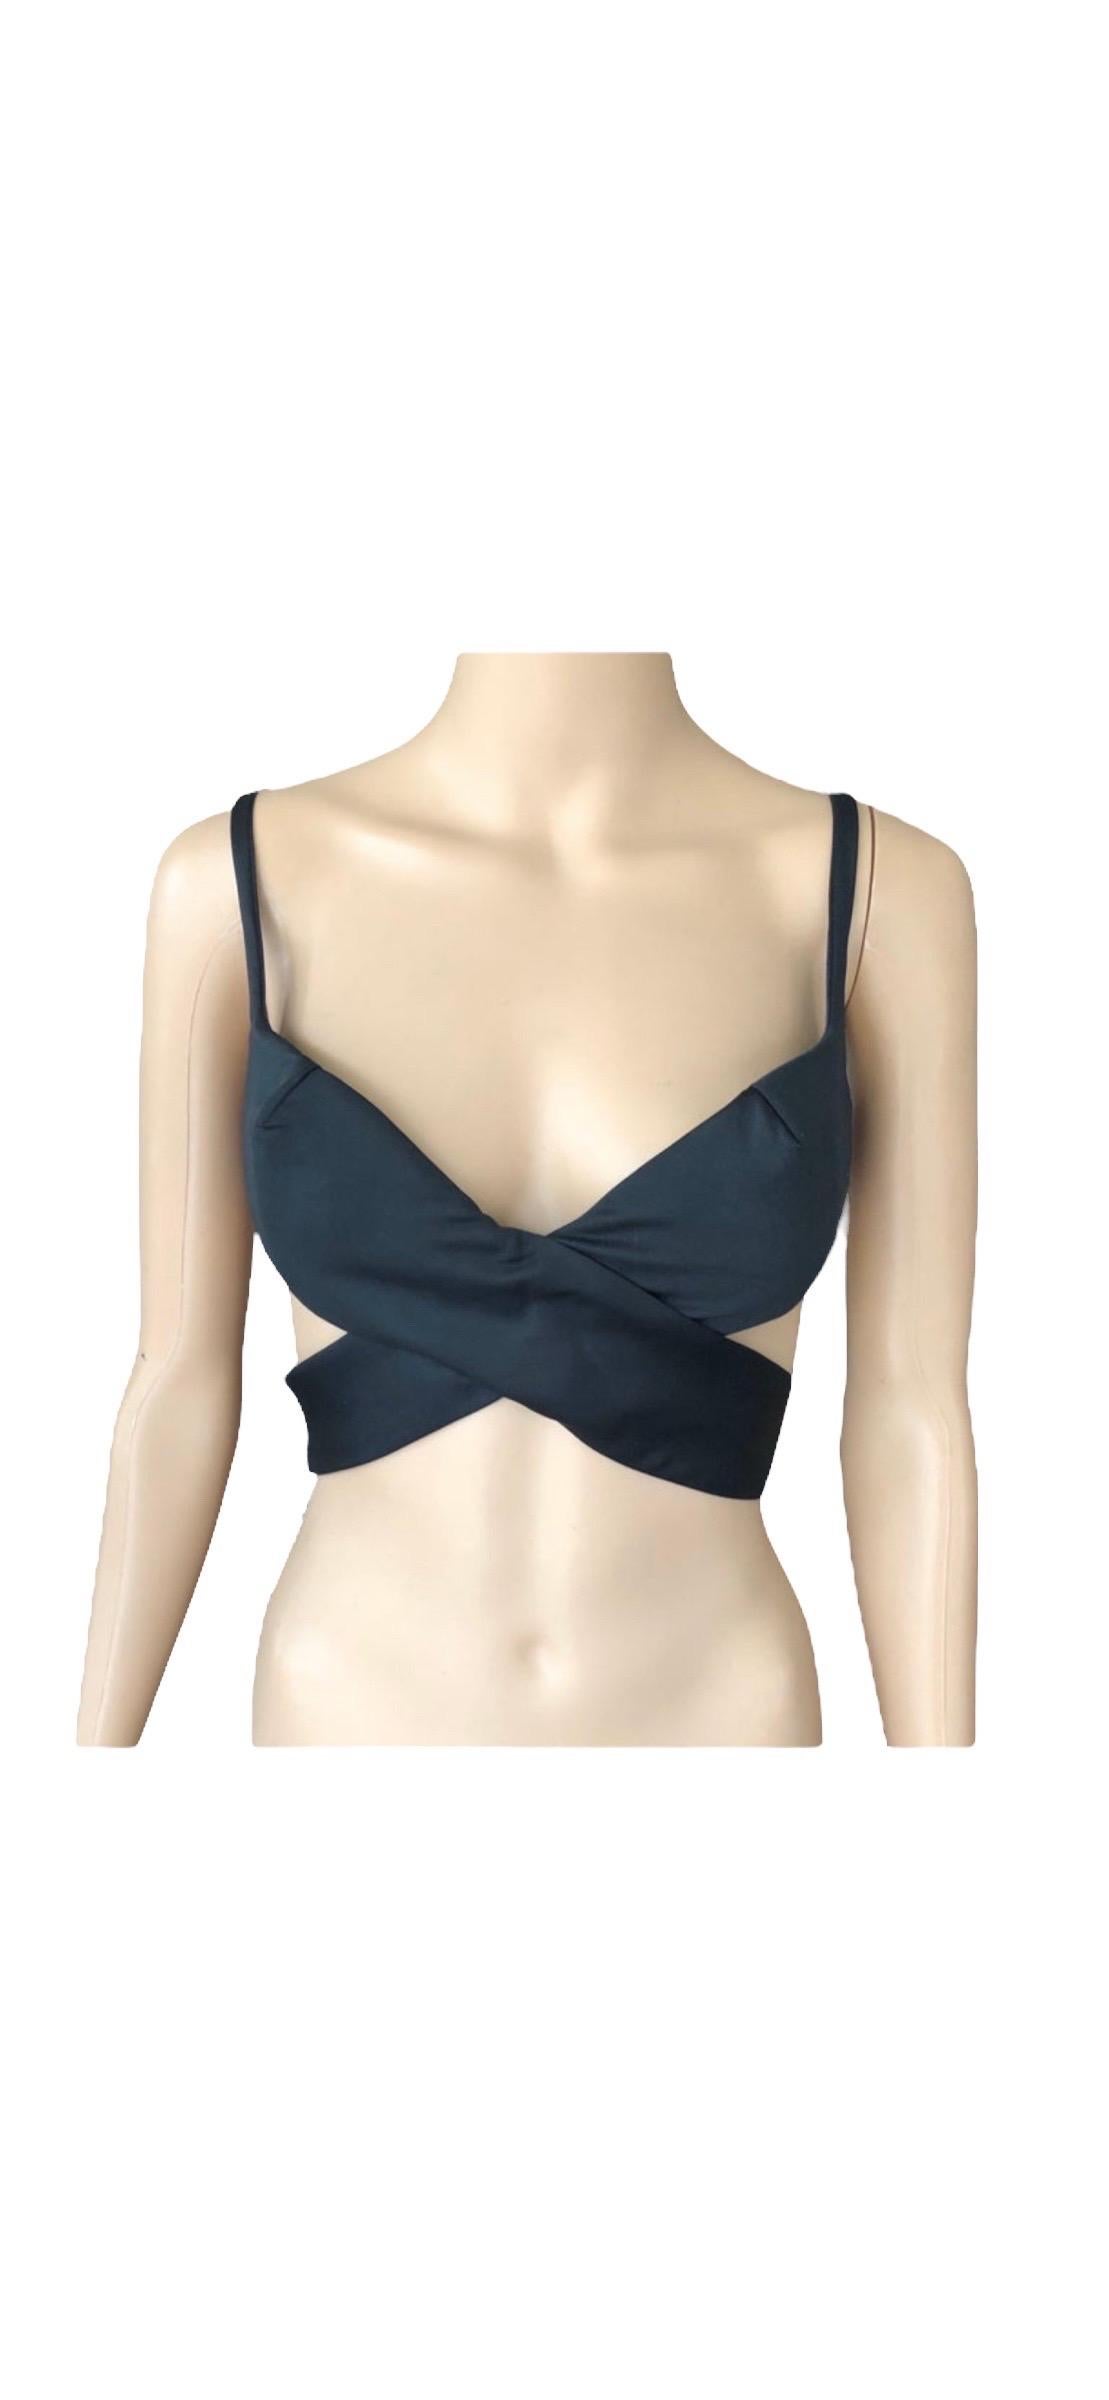 Tom Ford for Gucci S/S 2001 Runway Cutout Black Bustier Bra Crop Top IT 38

Gucci by Tom Ford silk cutout bustier crop top featuring hook & eye closure at back.